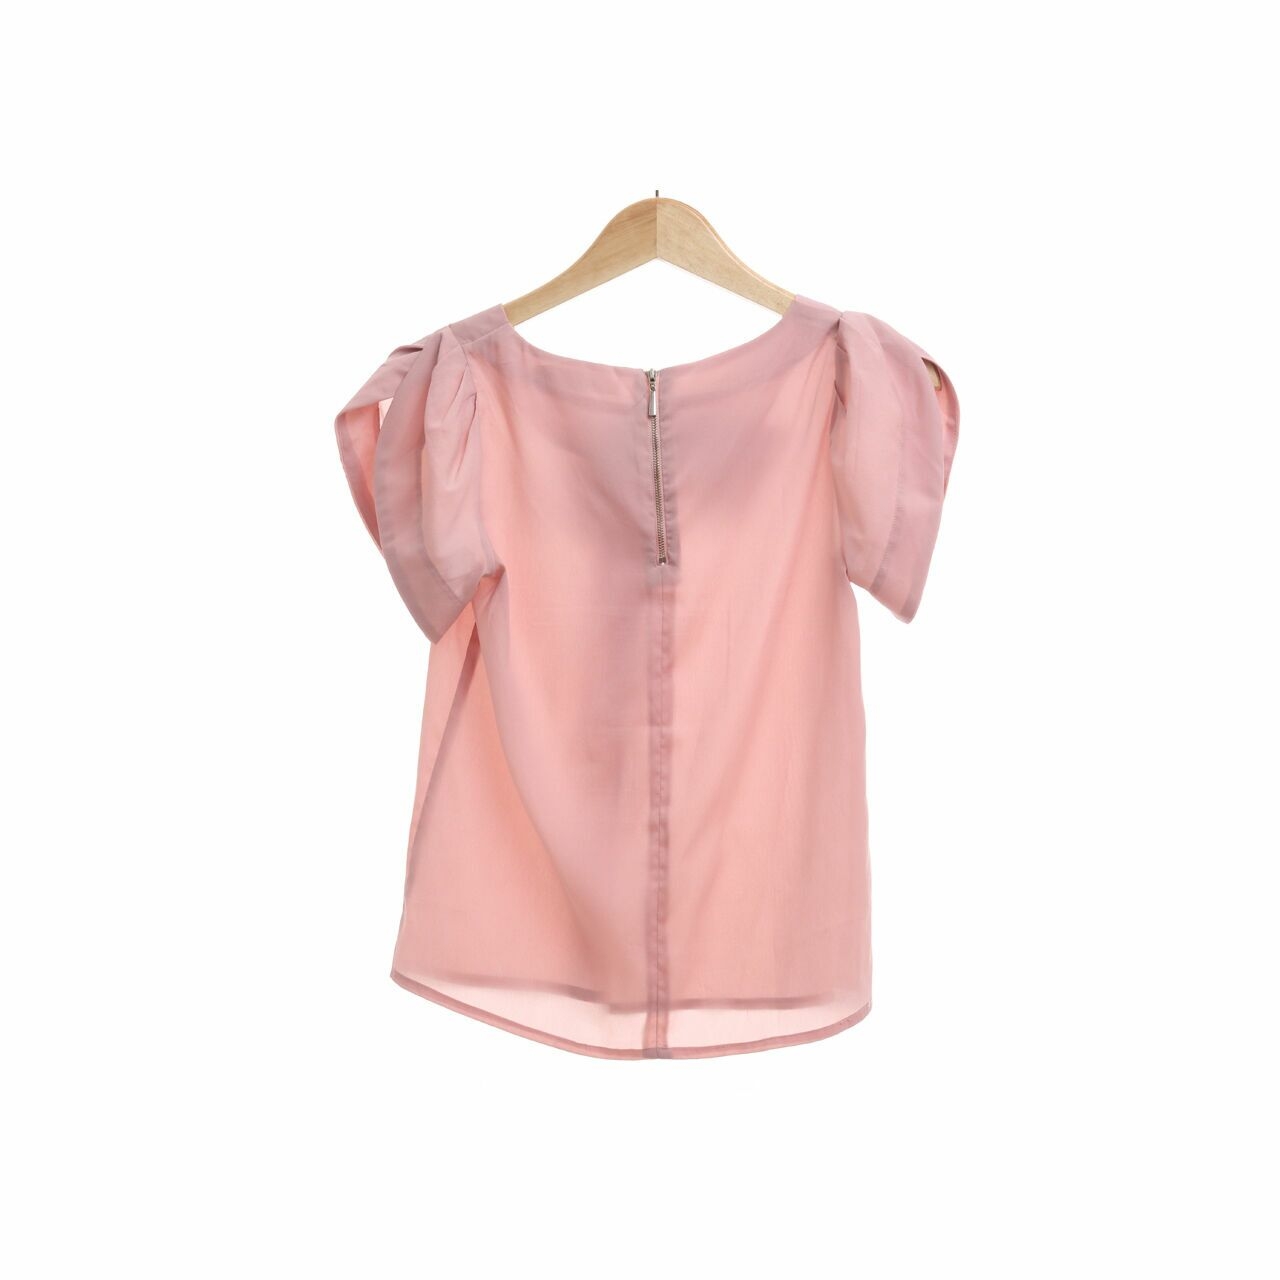 bYSI Pink Blouse